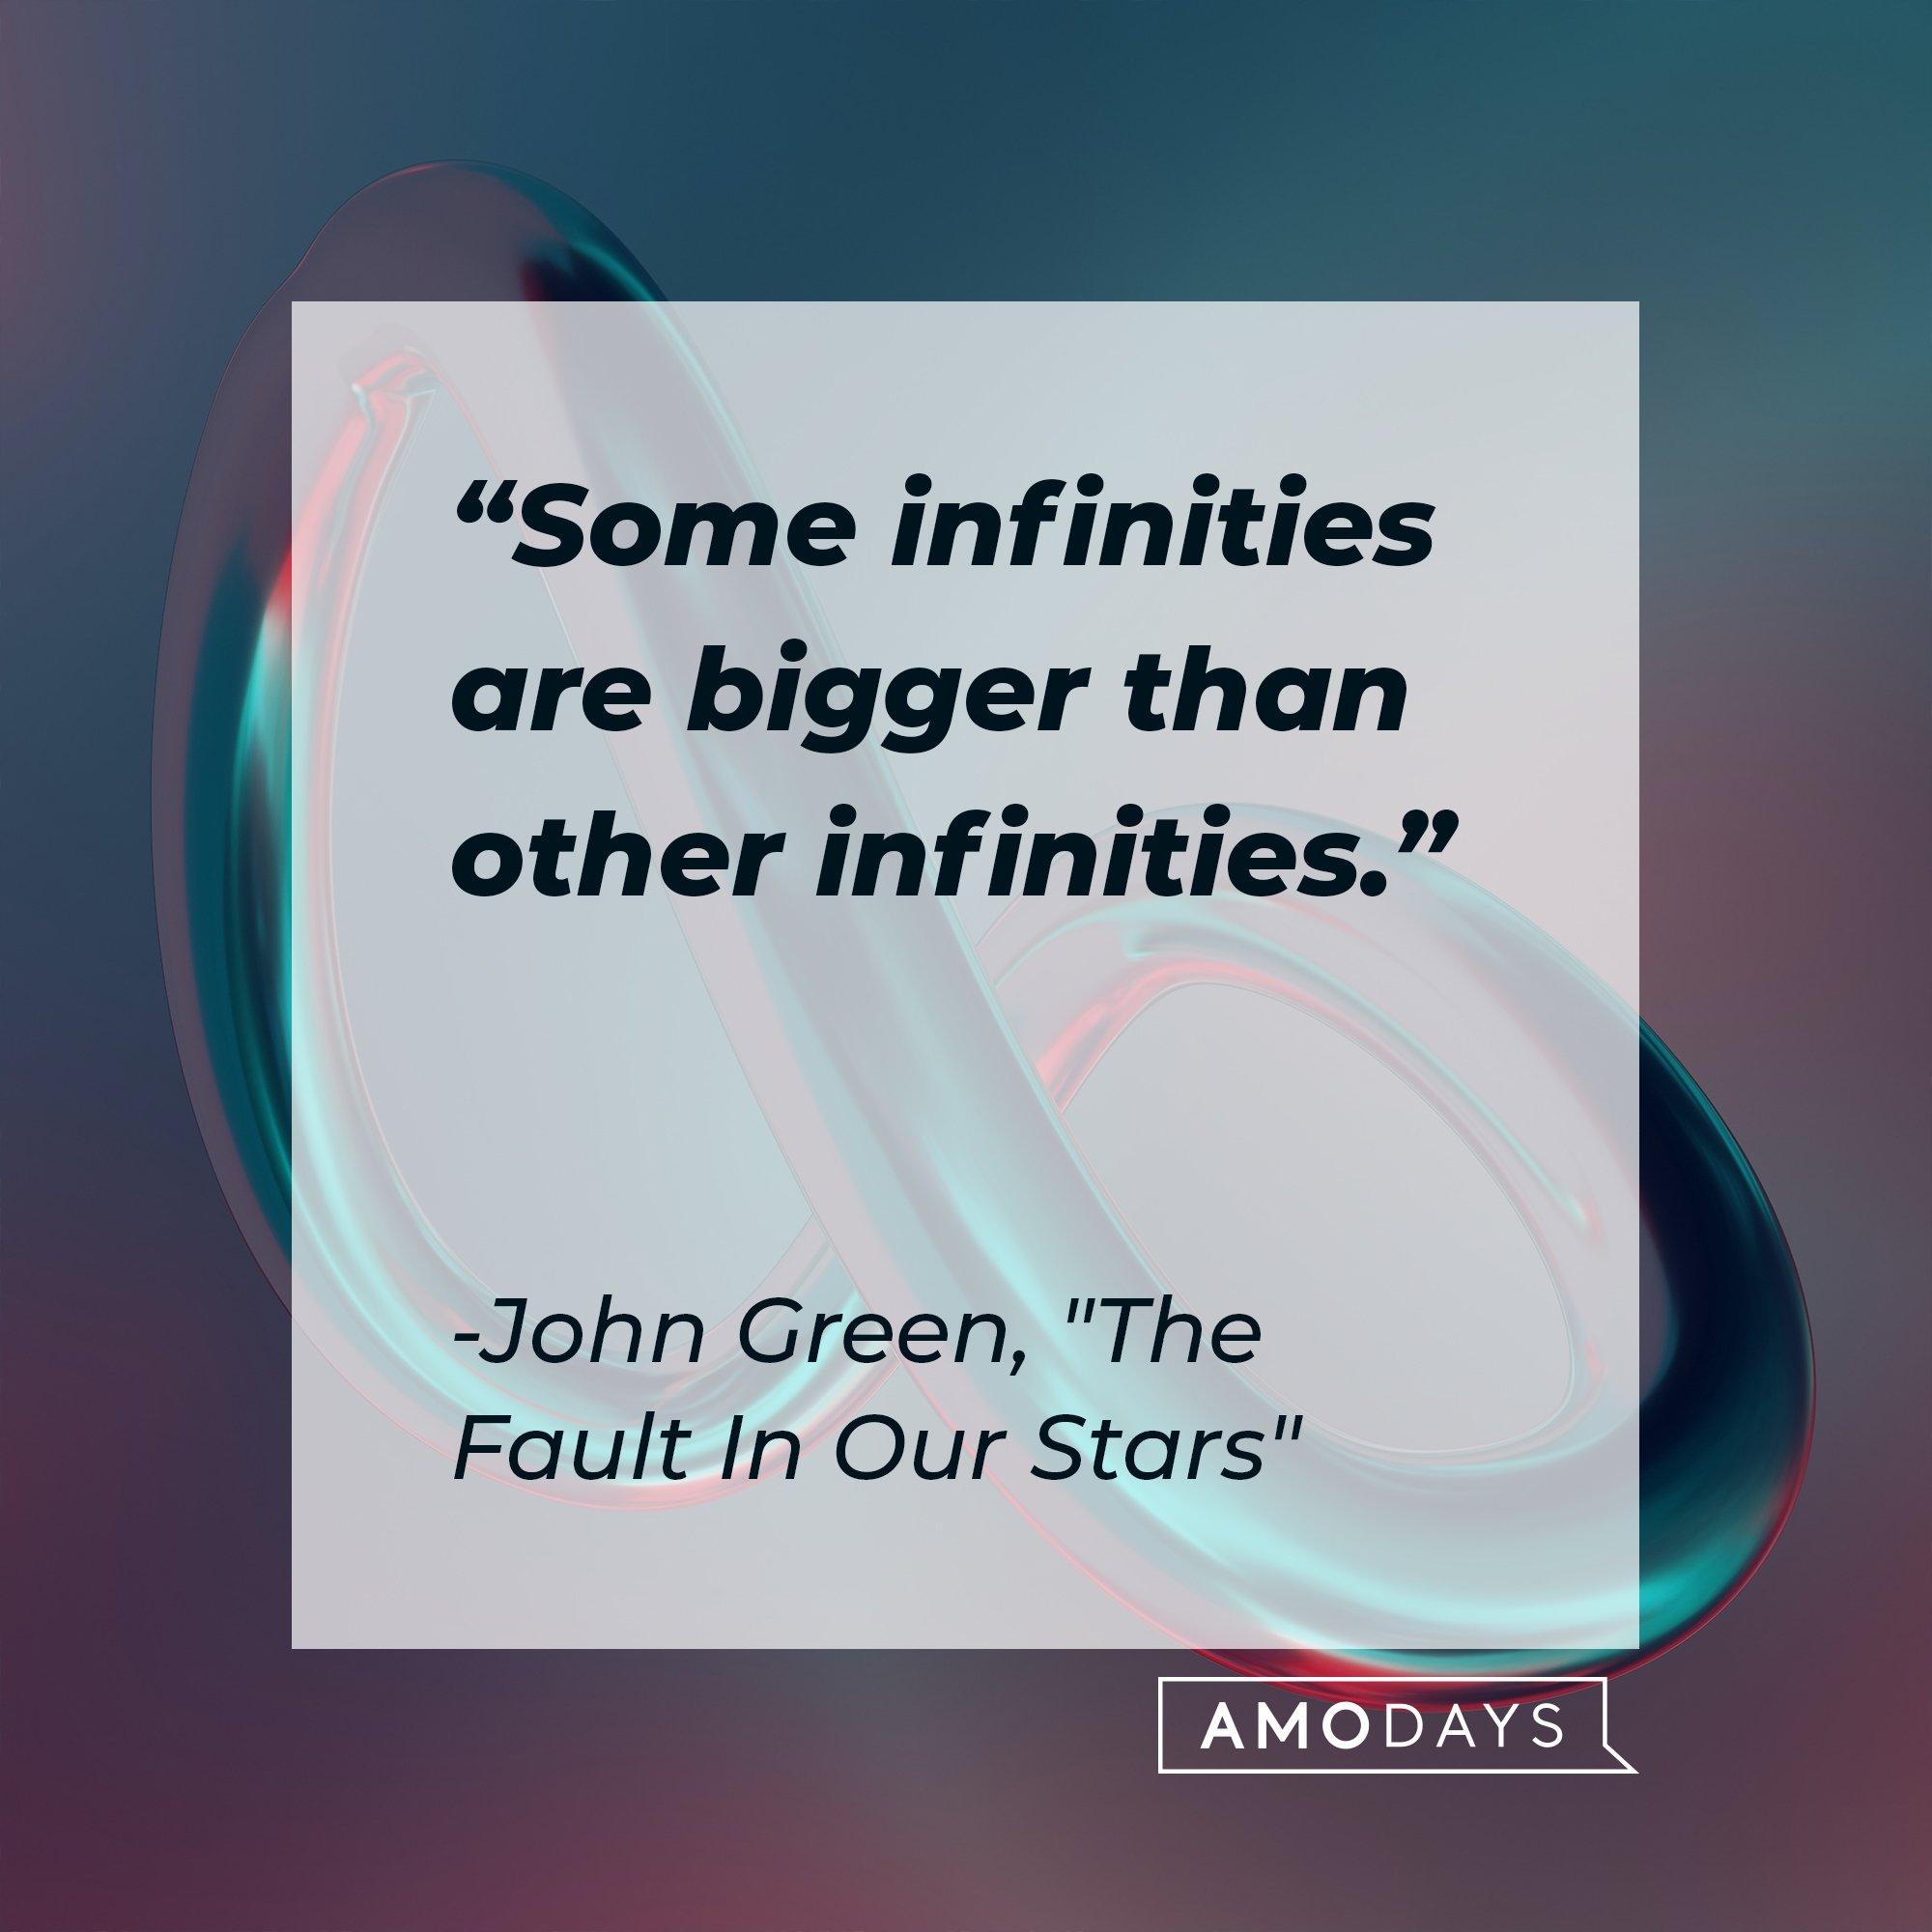 John Green’s quote from "The Fault In Our Stars":  "Some infinities are bigger than other infinities." | Image: AmoDays